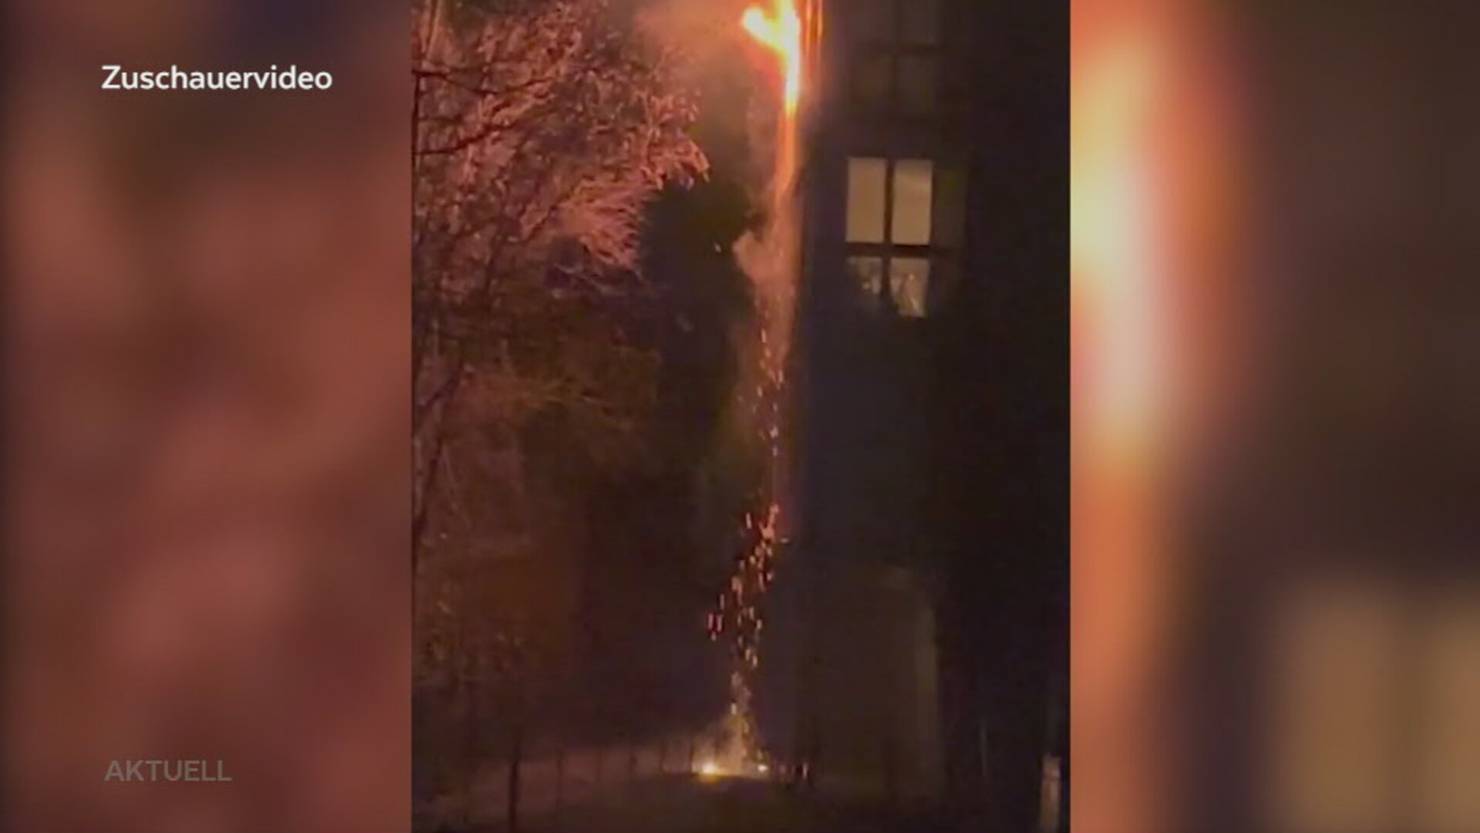 Fire destroys a 10-story apartment building in Zofingen – two children among the injured